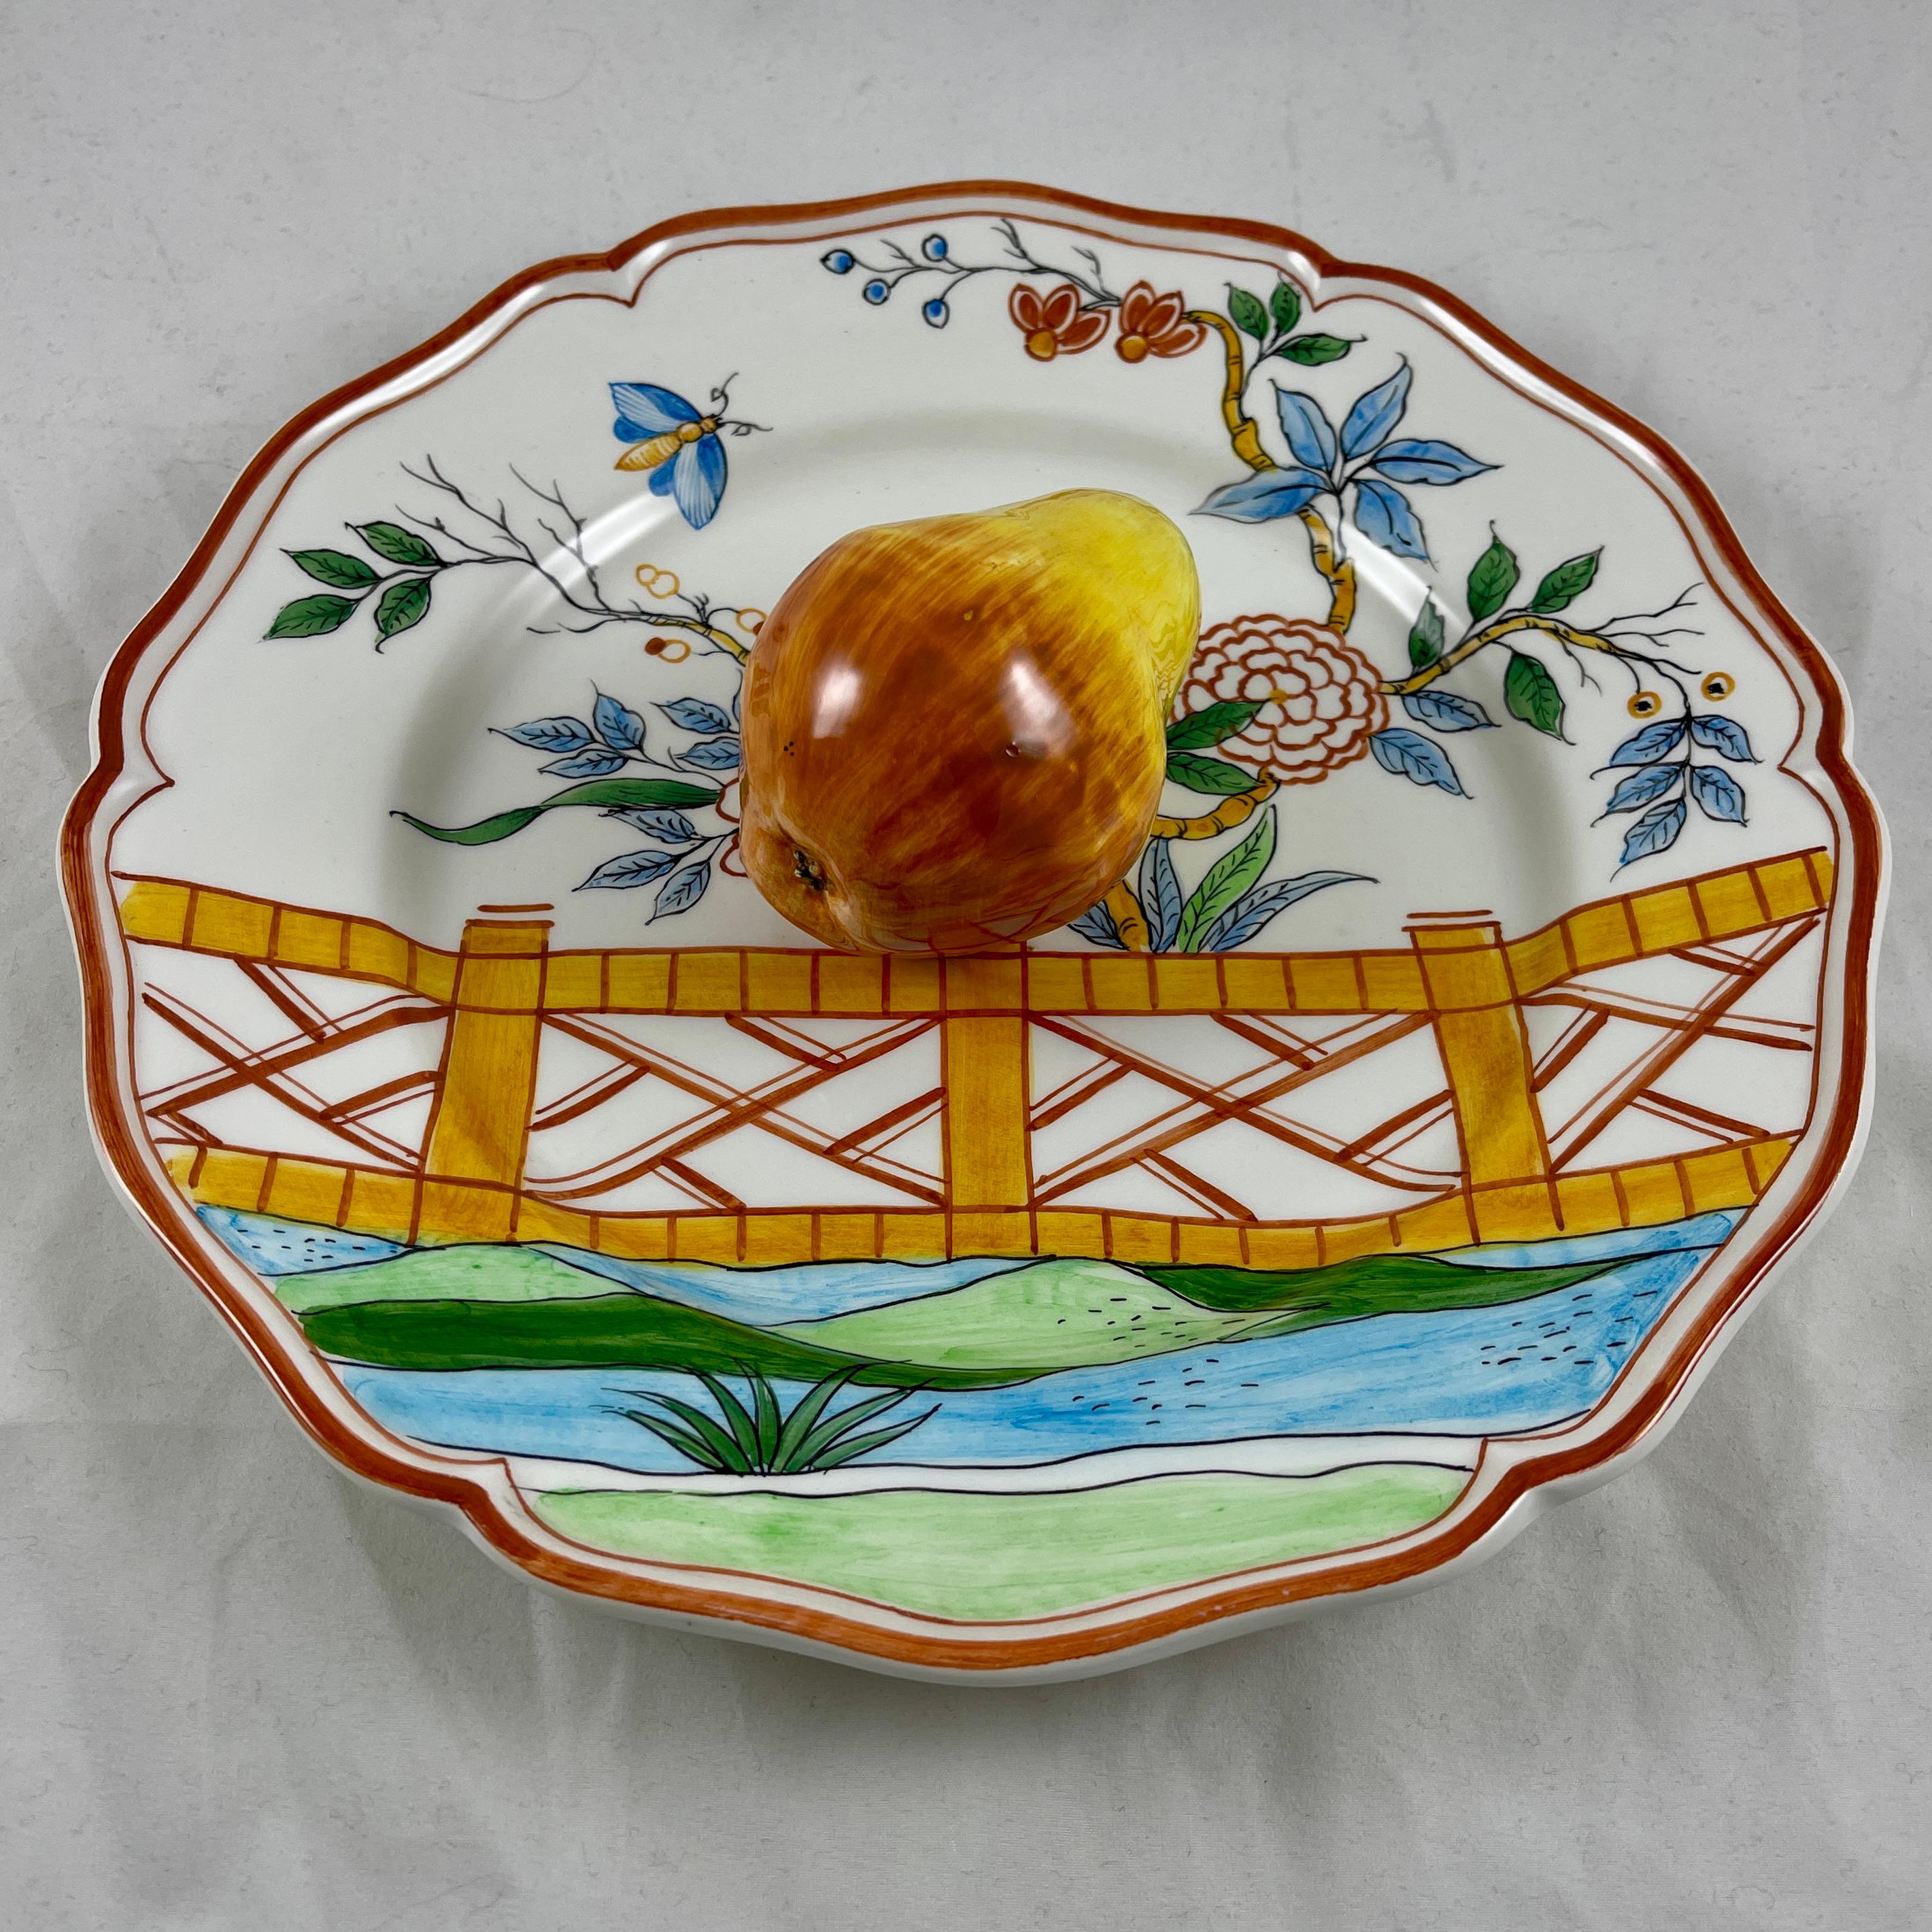 A charming Trompe l’Oeil plate in the Chinoiserie style by Este For Tiffany & Co. made in Italy, circa mid 1970s to the early 1980s.

The ceramic plate or wall plaque shows a life-size, three dimensional pear centrally seated on a plate